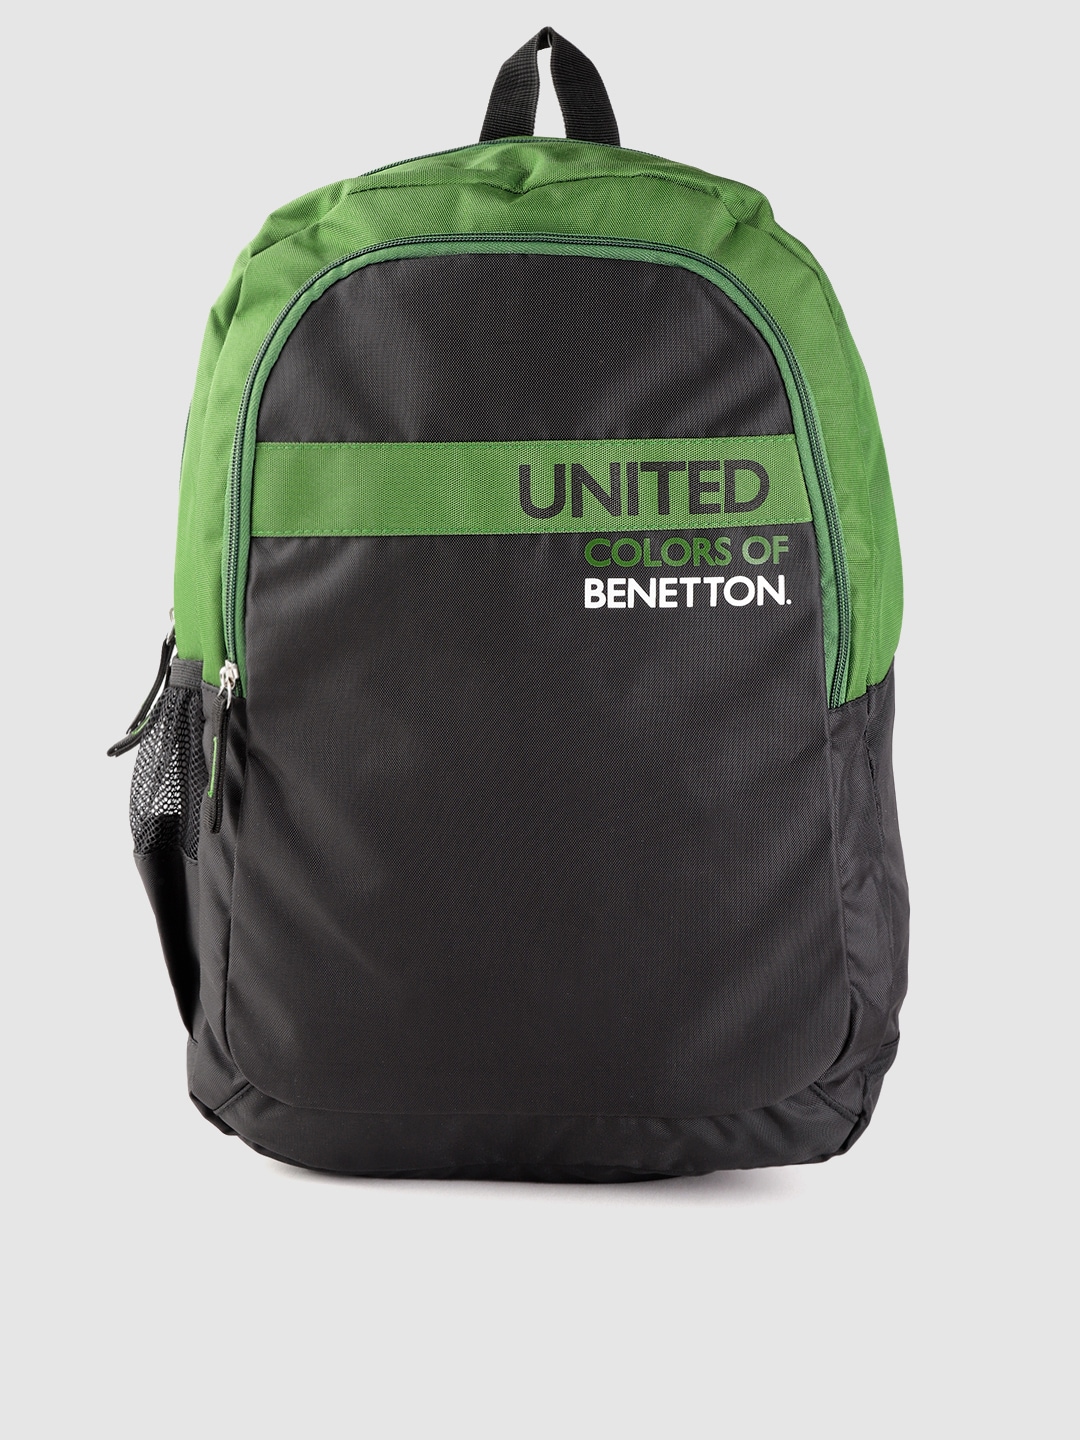 United Colors of Benetton Unisex Black & Green Typography Laptop Backpack Price in India